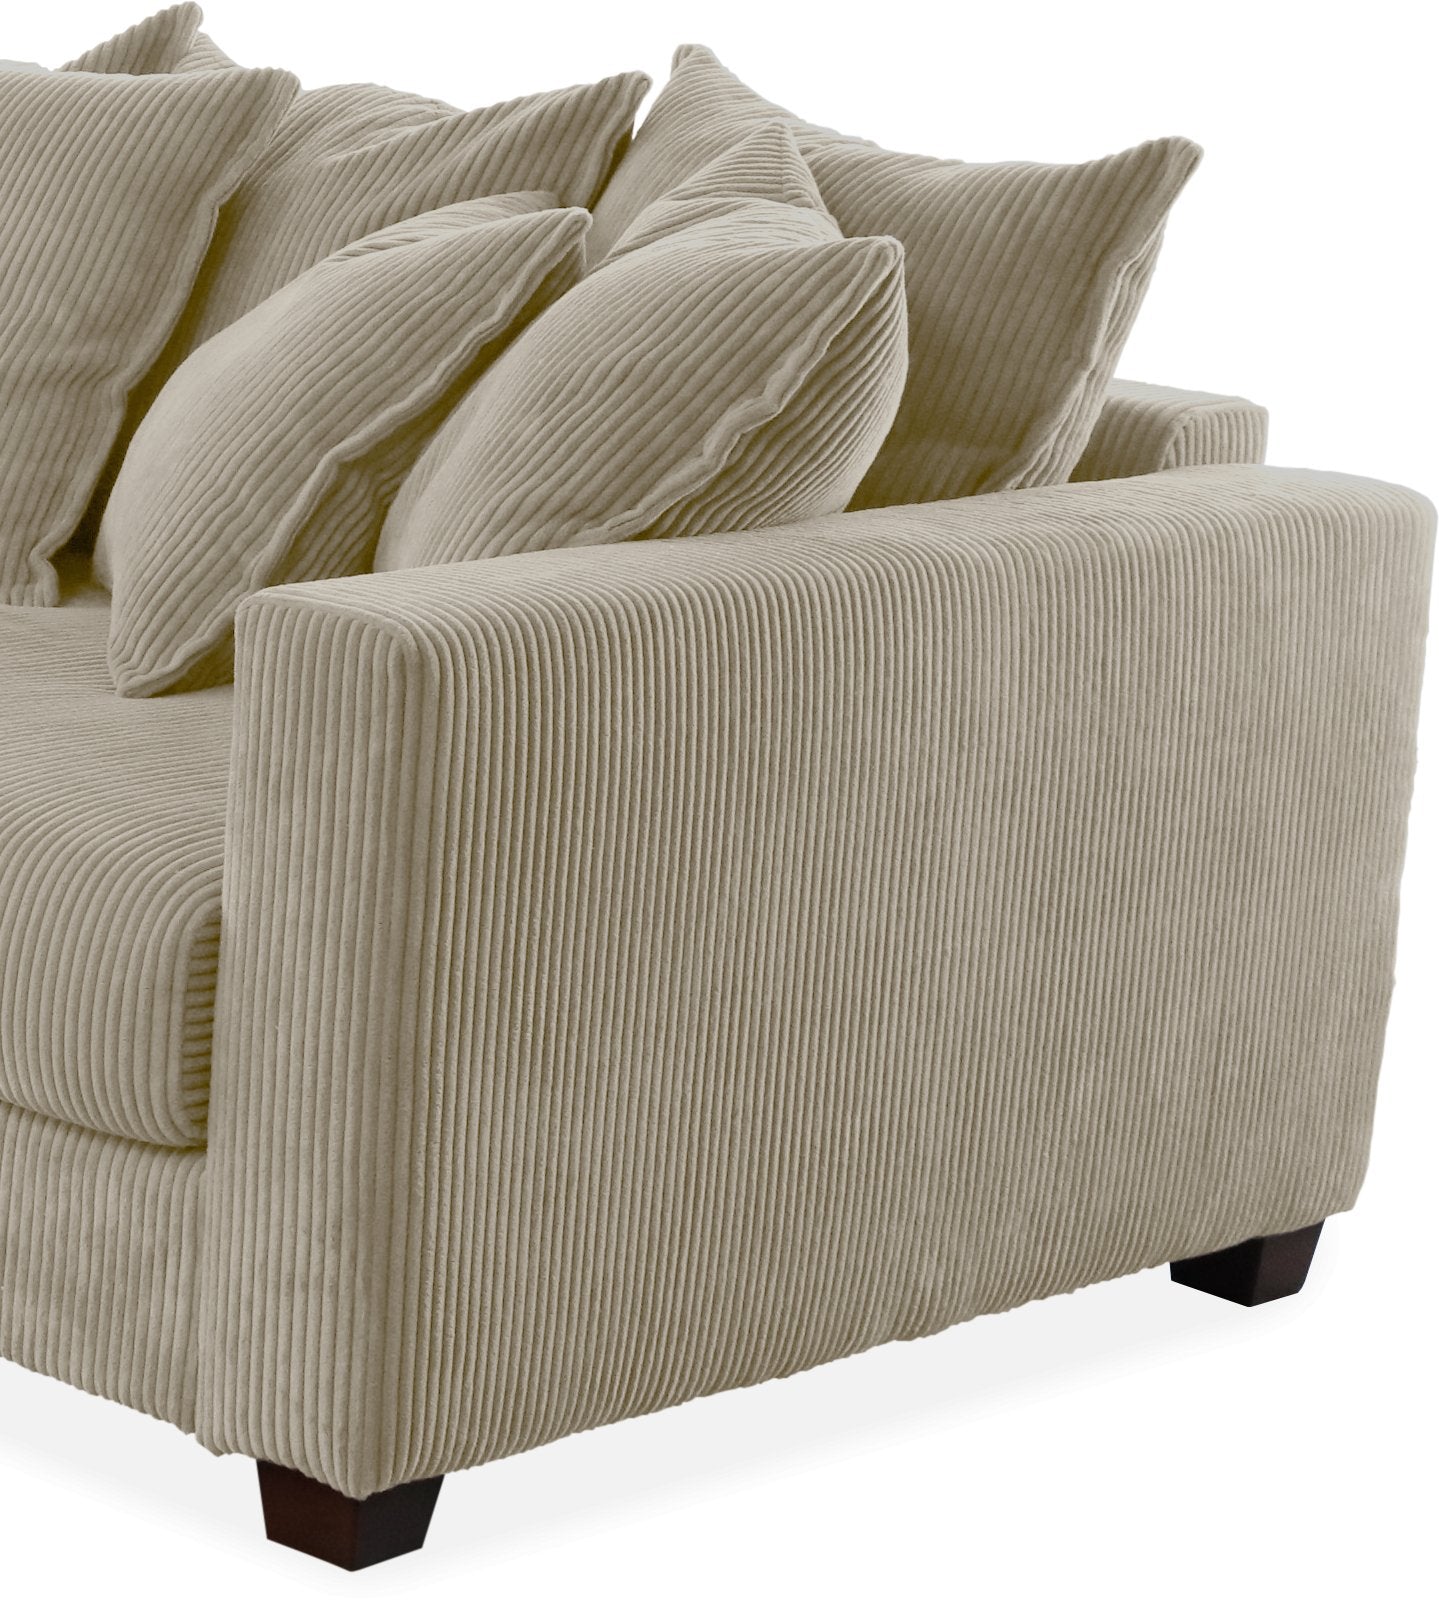 ELSA 3-seater sofa Cream removable & washable covers. - Scandinavian Stories by Marton